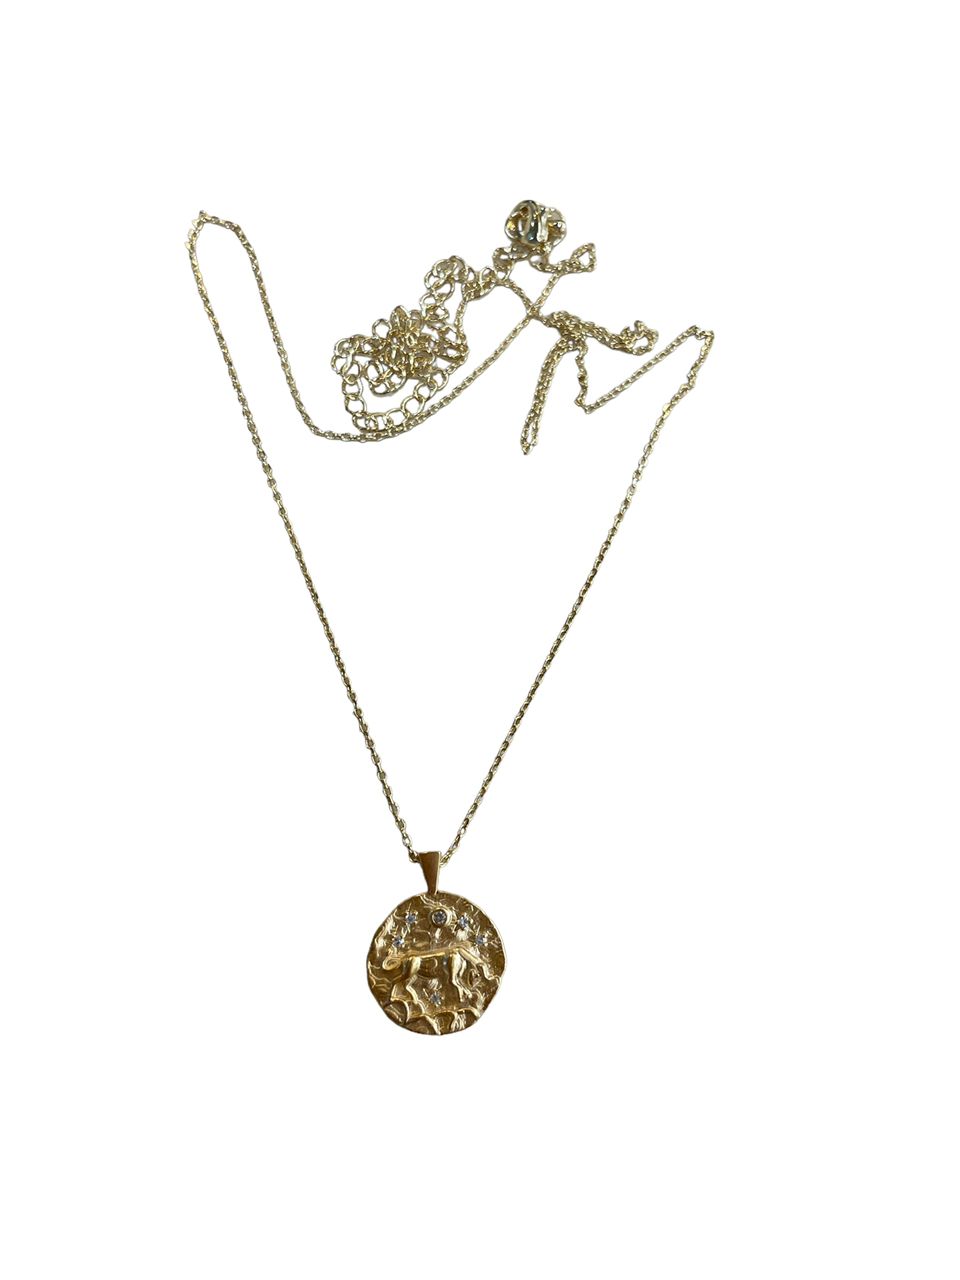 Necklace Astrological sign TAURUS - مجوهرات